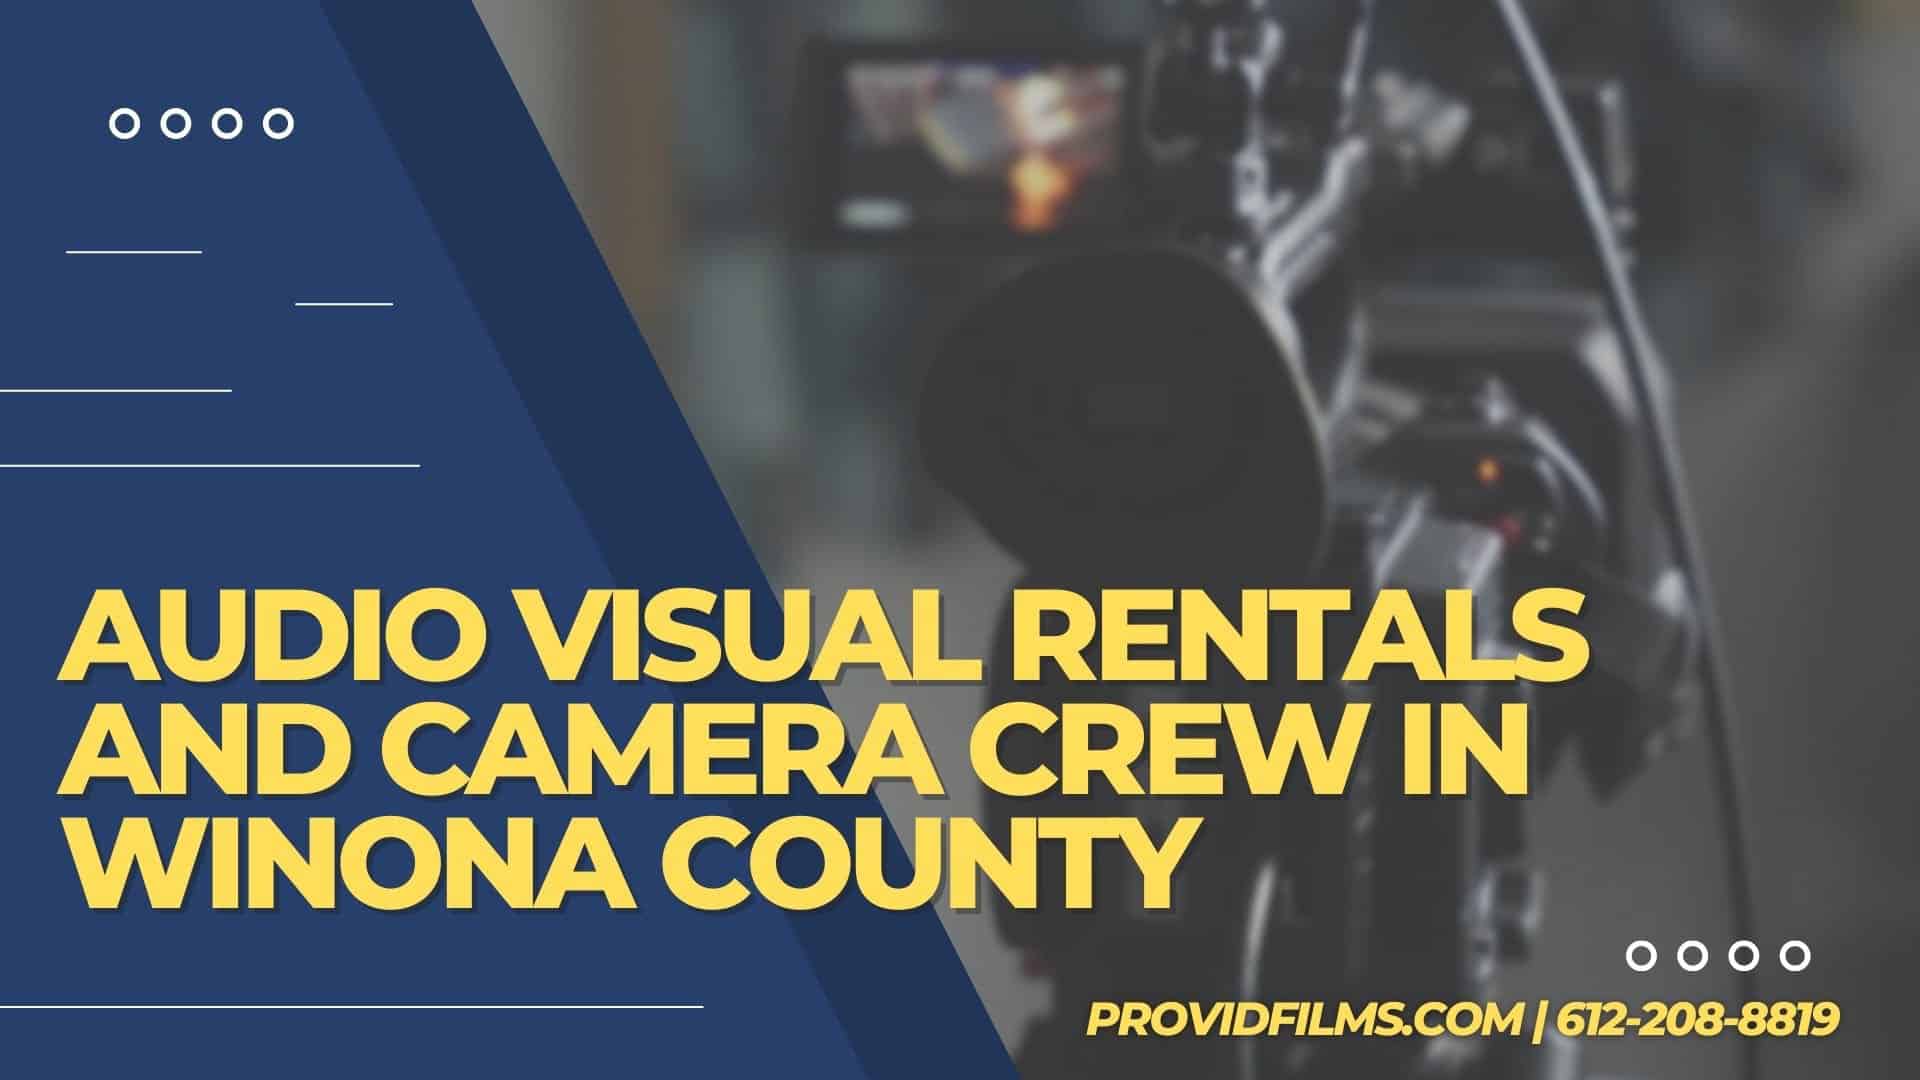 Graphic with a video camera crew with the text saying "AV Rental and Camera Crew in Winona County"